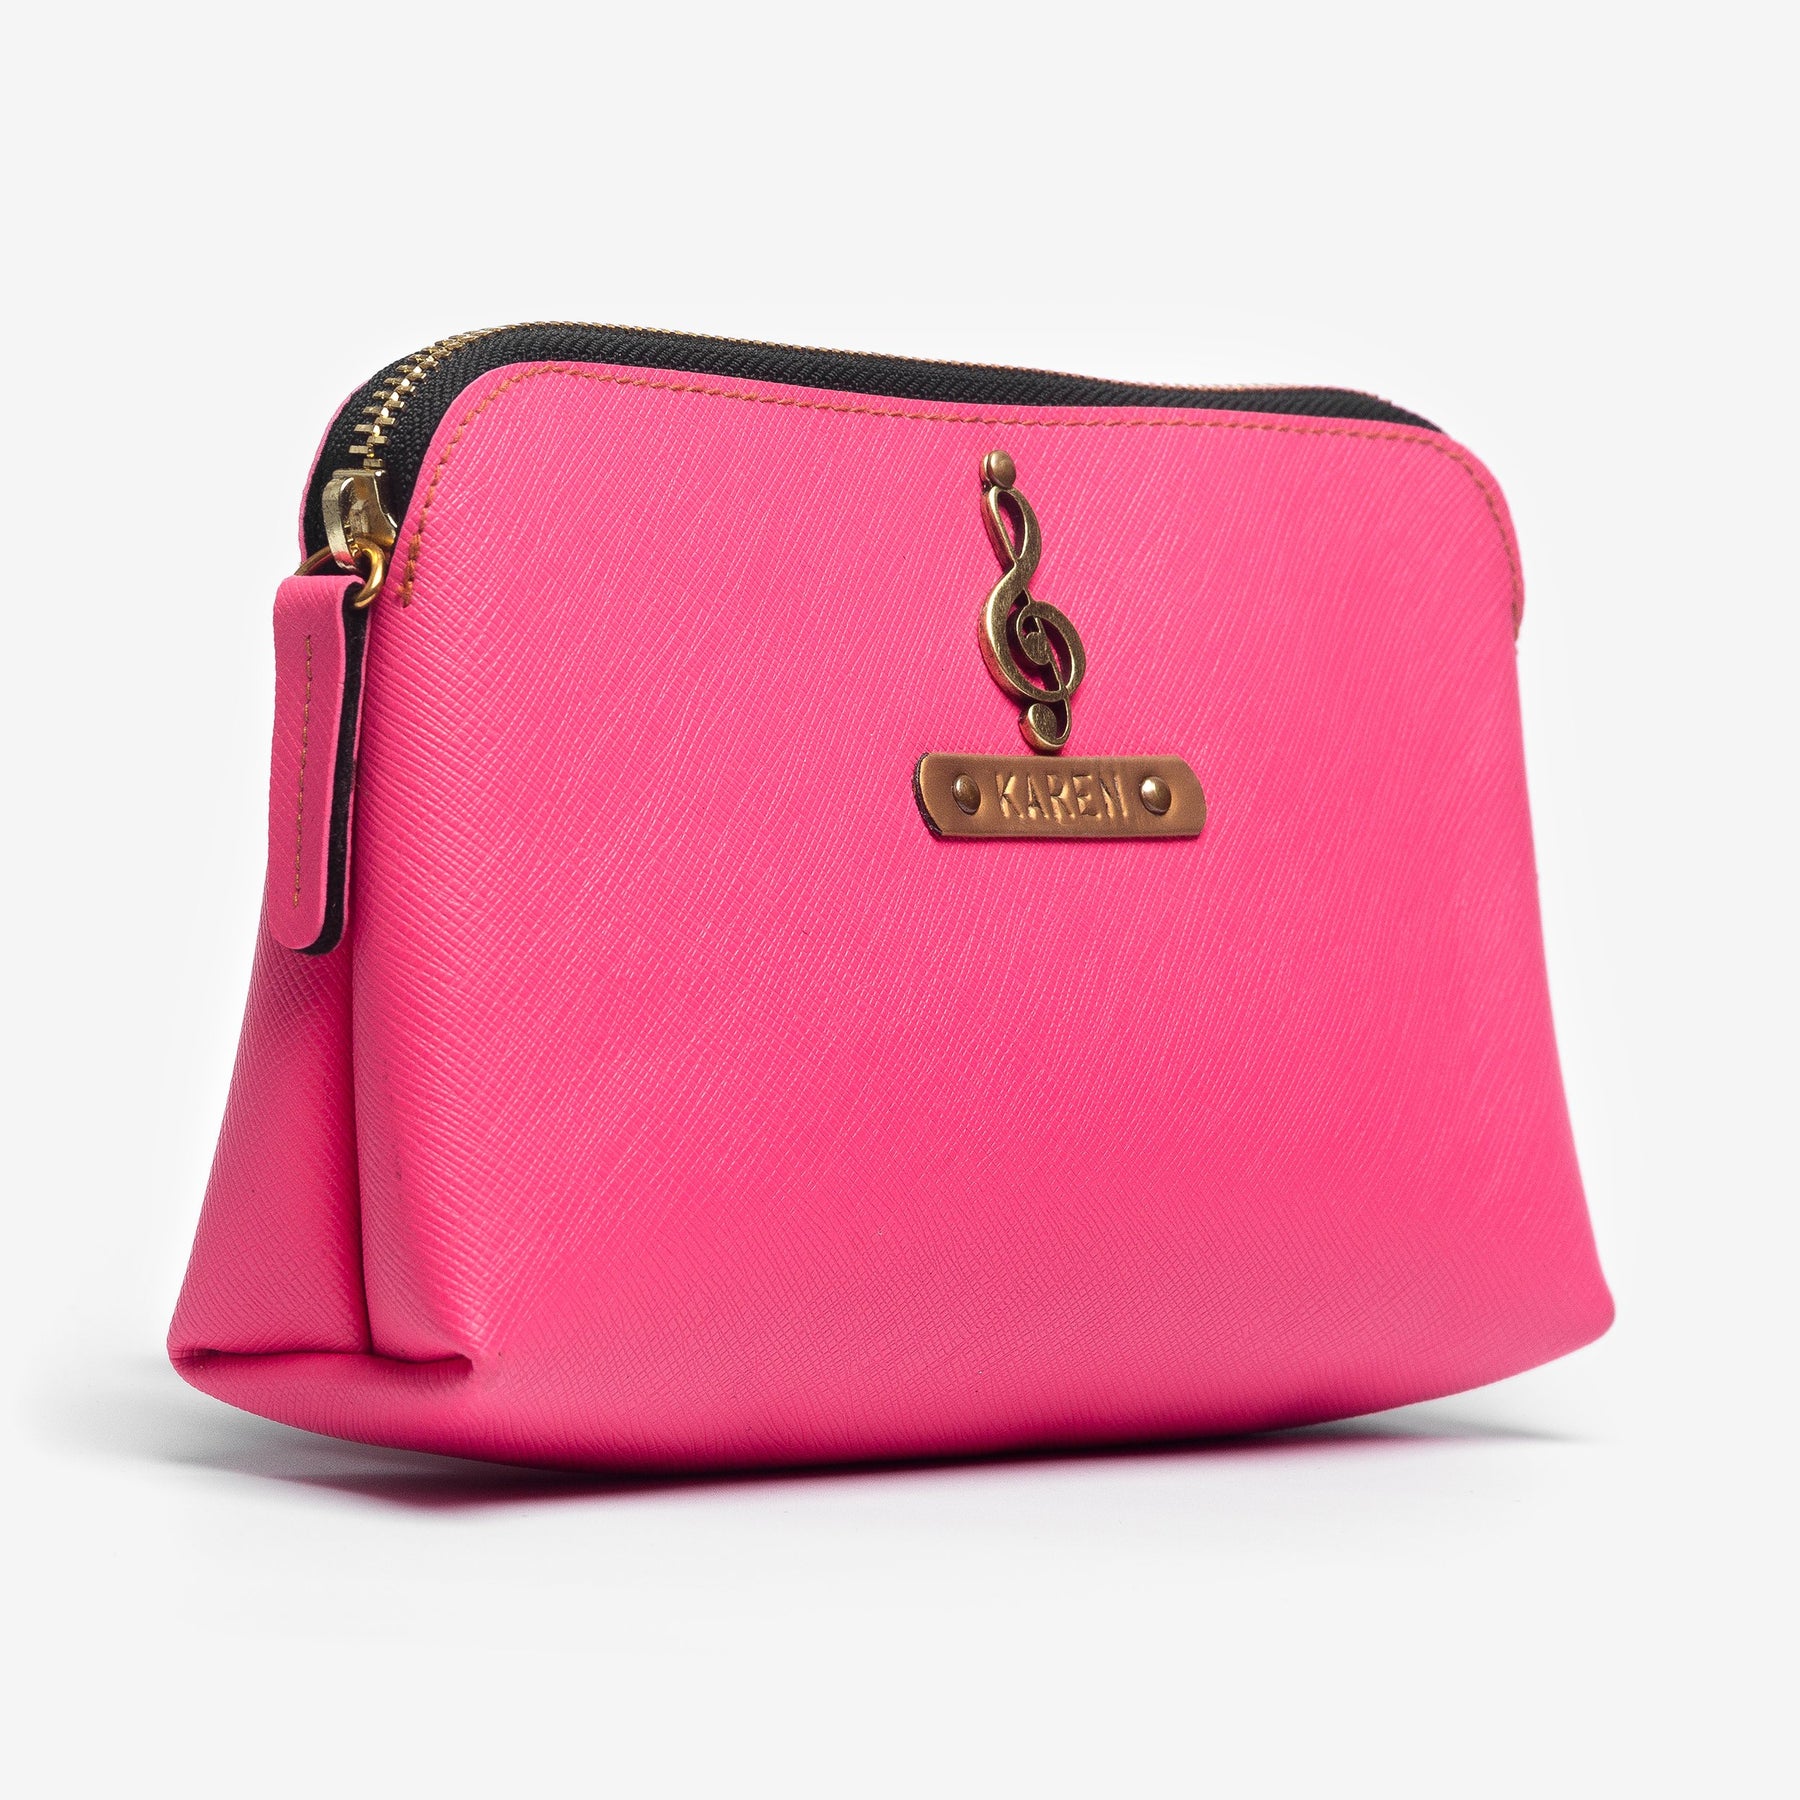 Buy Personalized Pink Makeup Bags Online